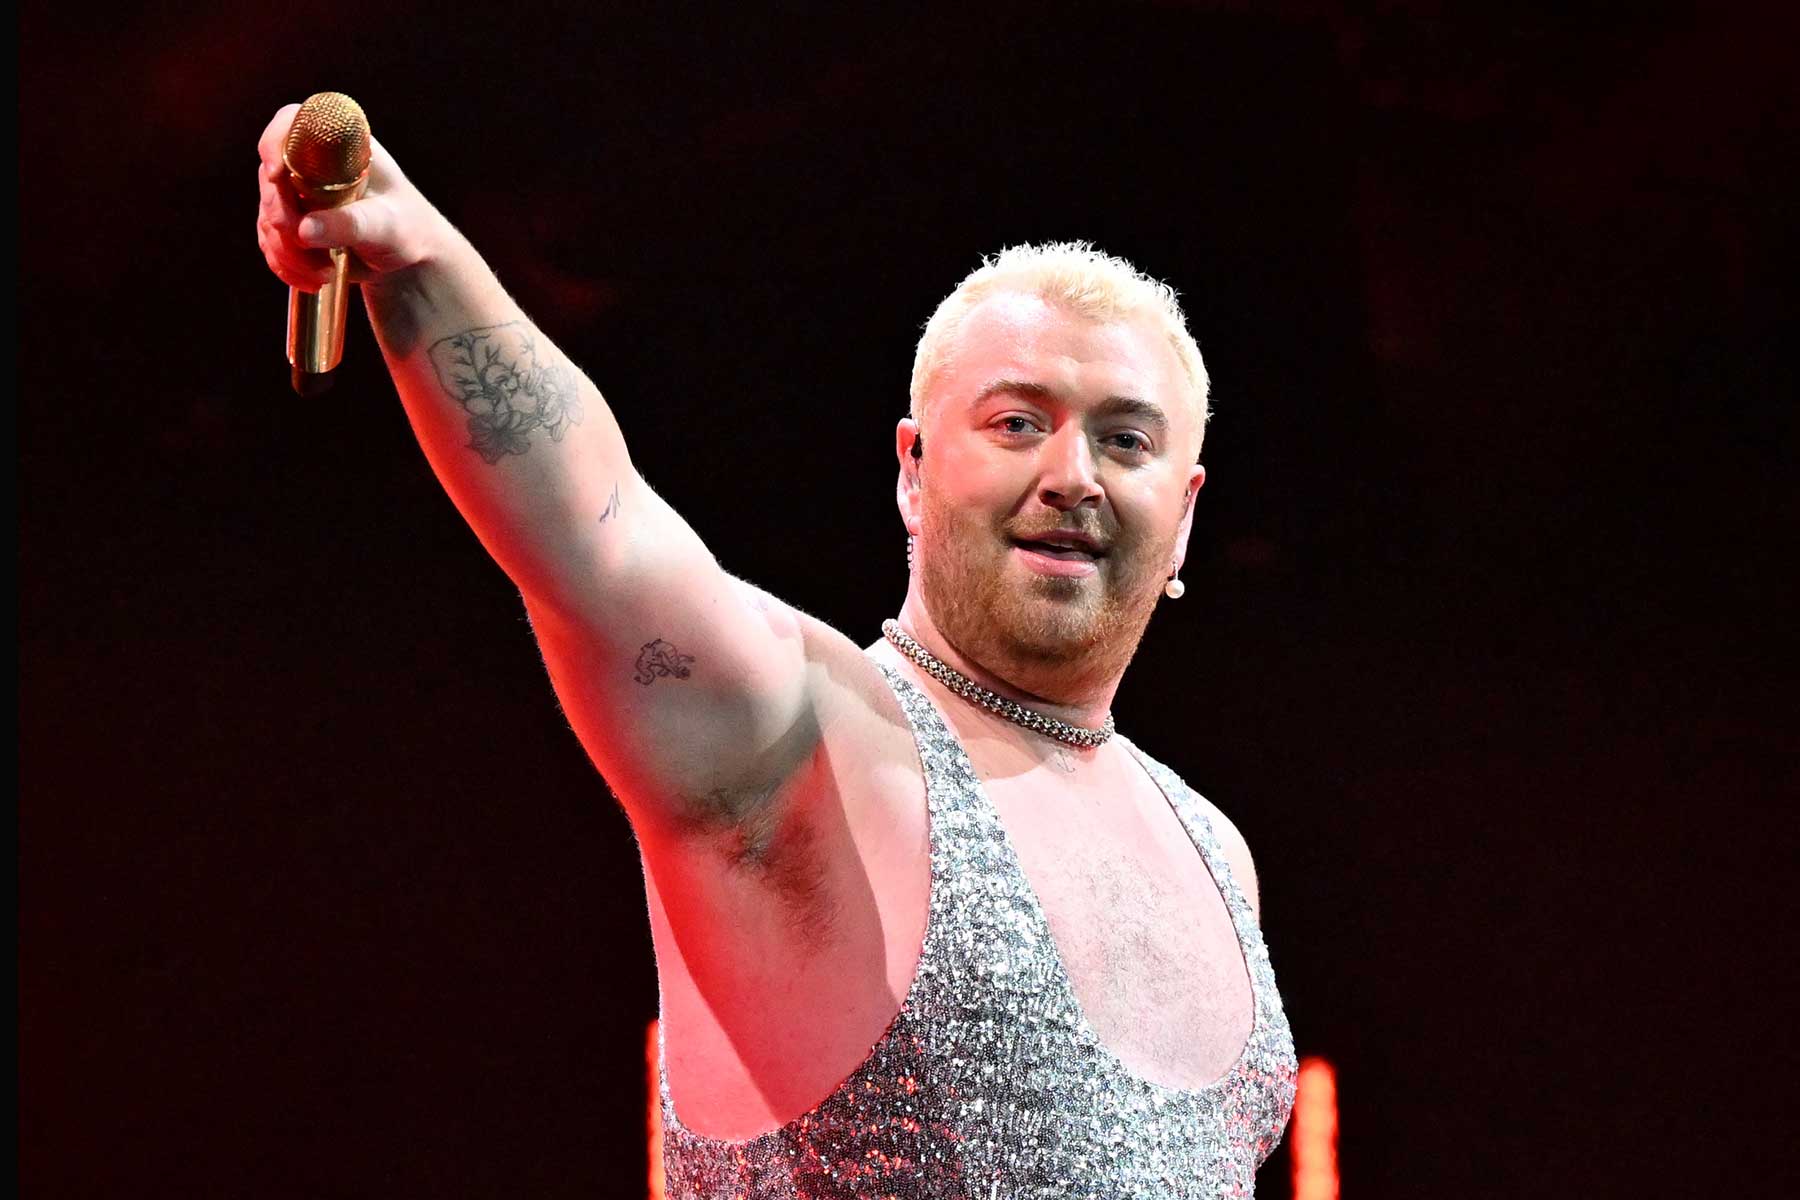 Why Are People Mad at Sam Smith's Corset Photoshoot?